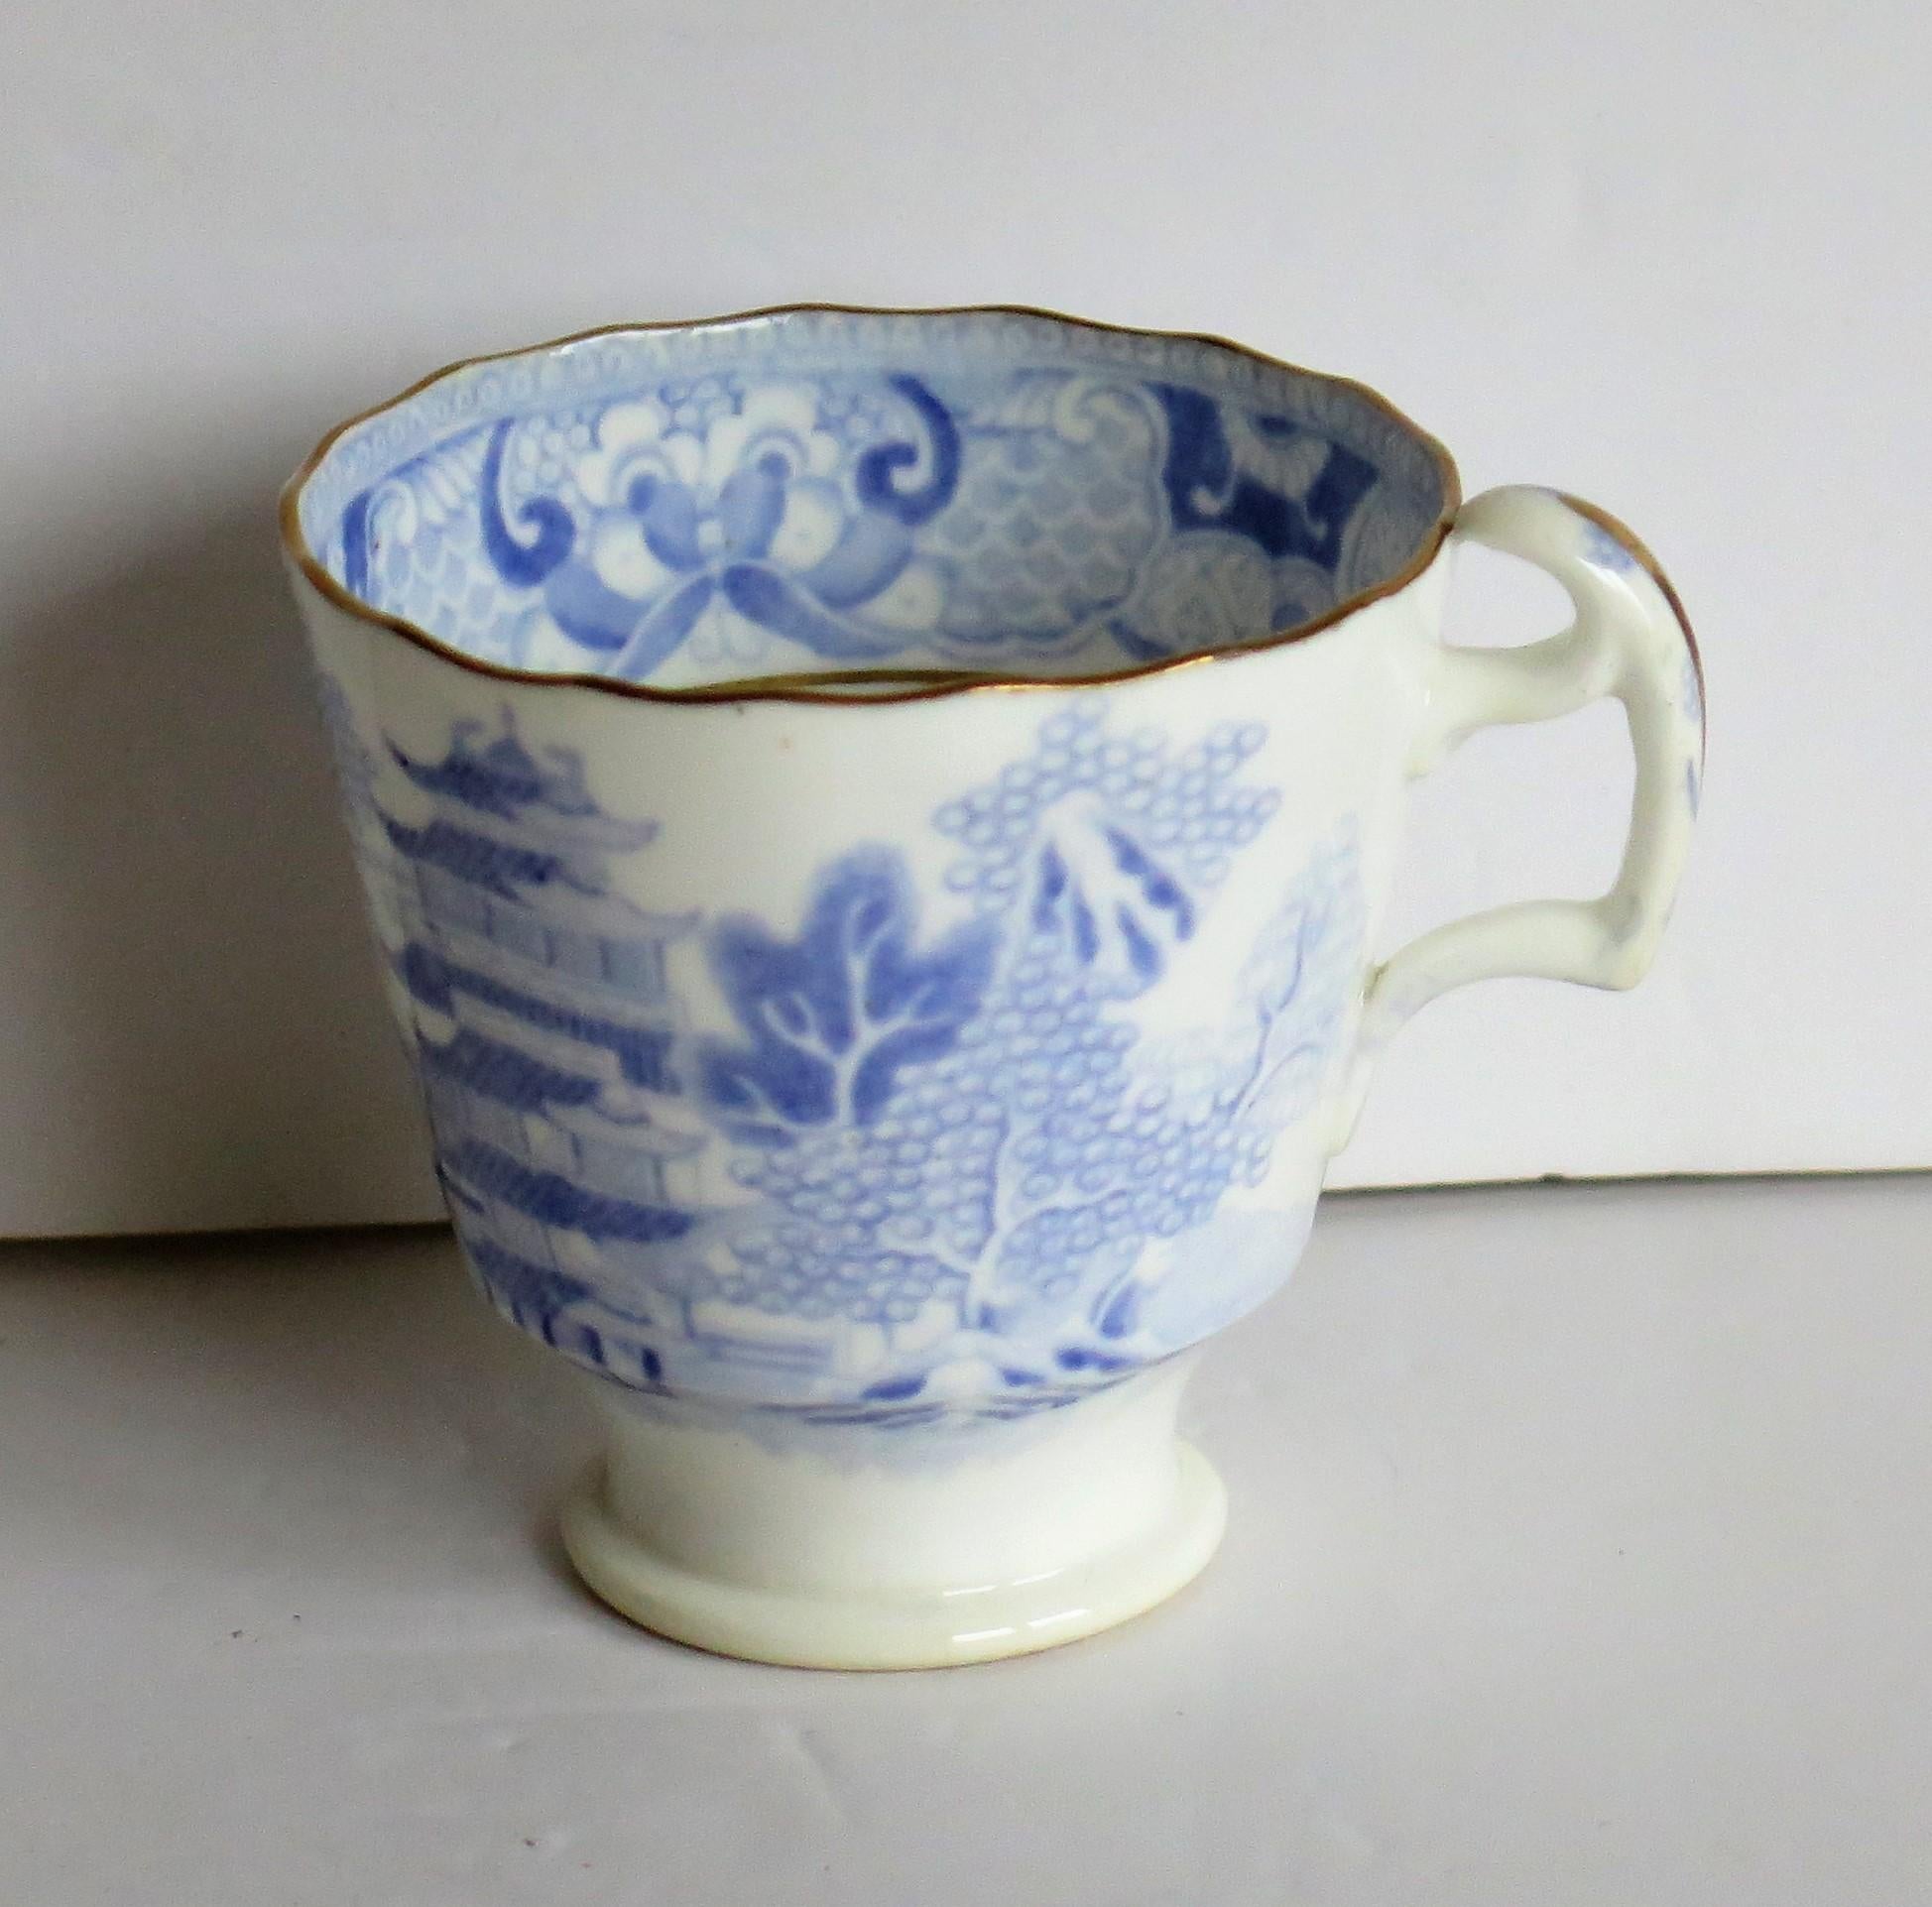 Glazed Miles Mason Porcelain Cup and Saucer Blue Broseley Willow Pattern, circa 1815